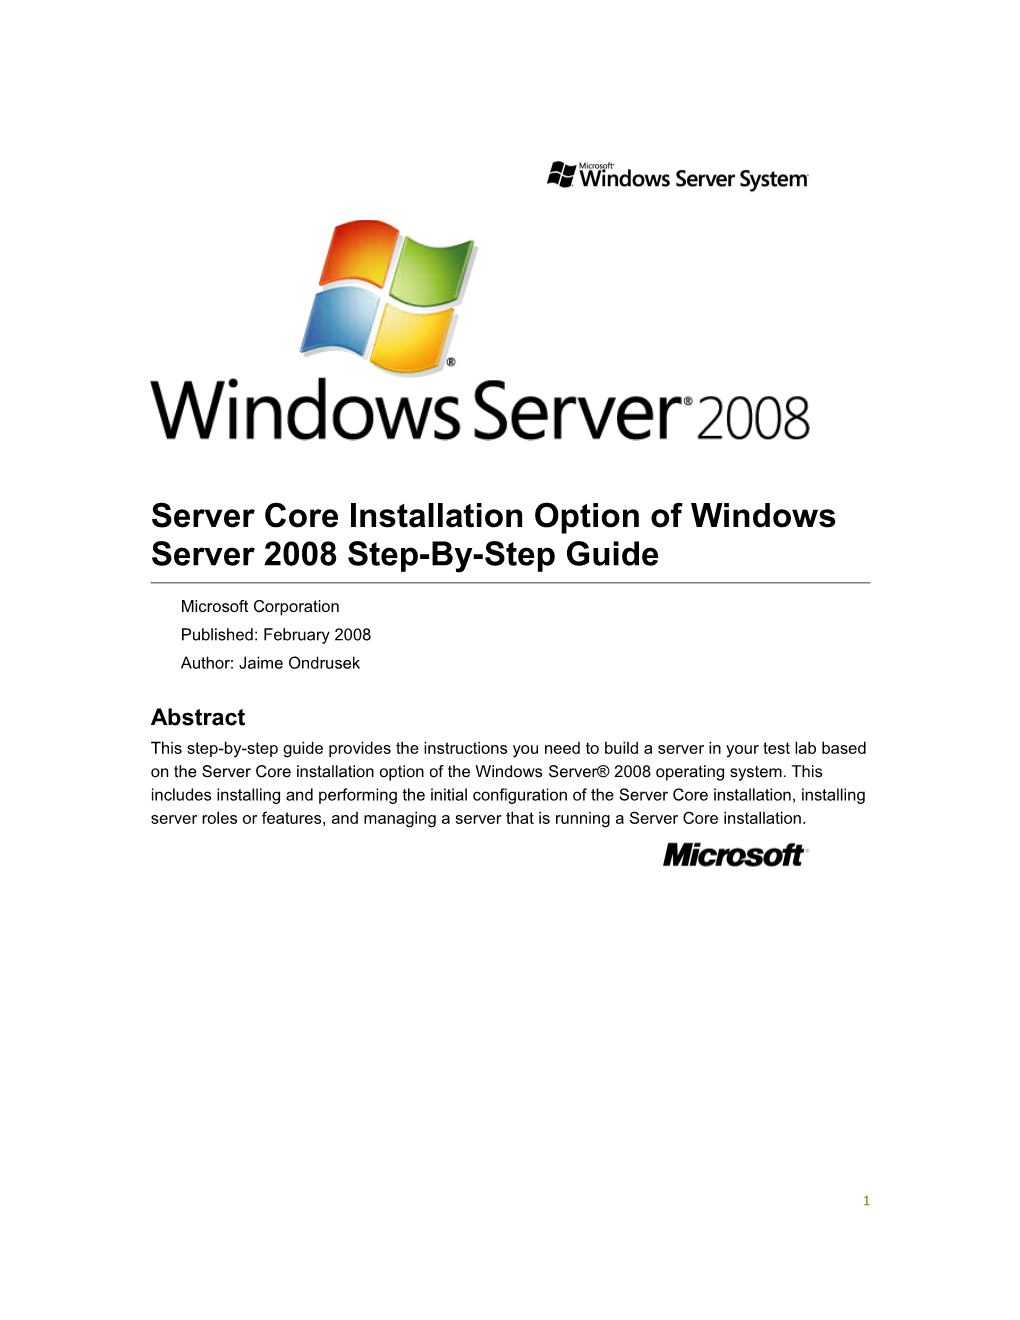 Server Core Installation Option of Windows Server 2008 Step-By-Step Guide